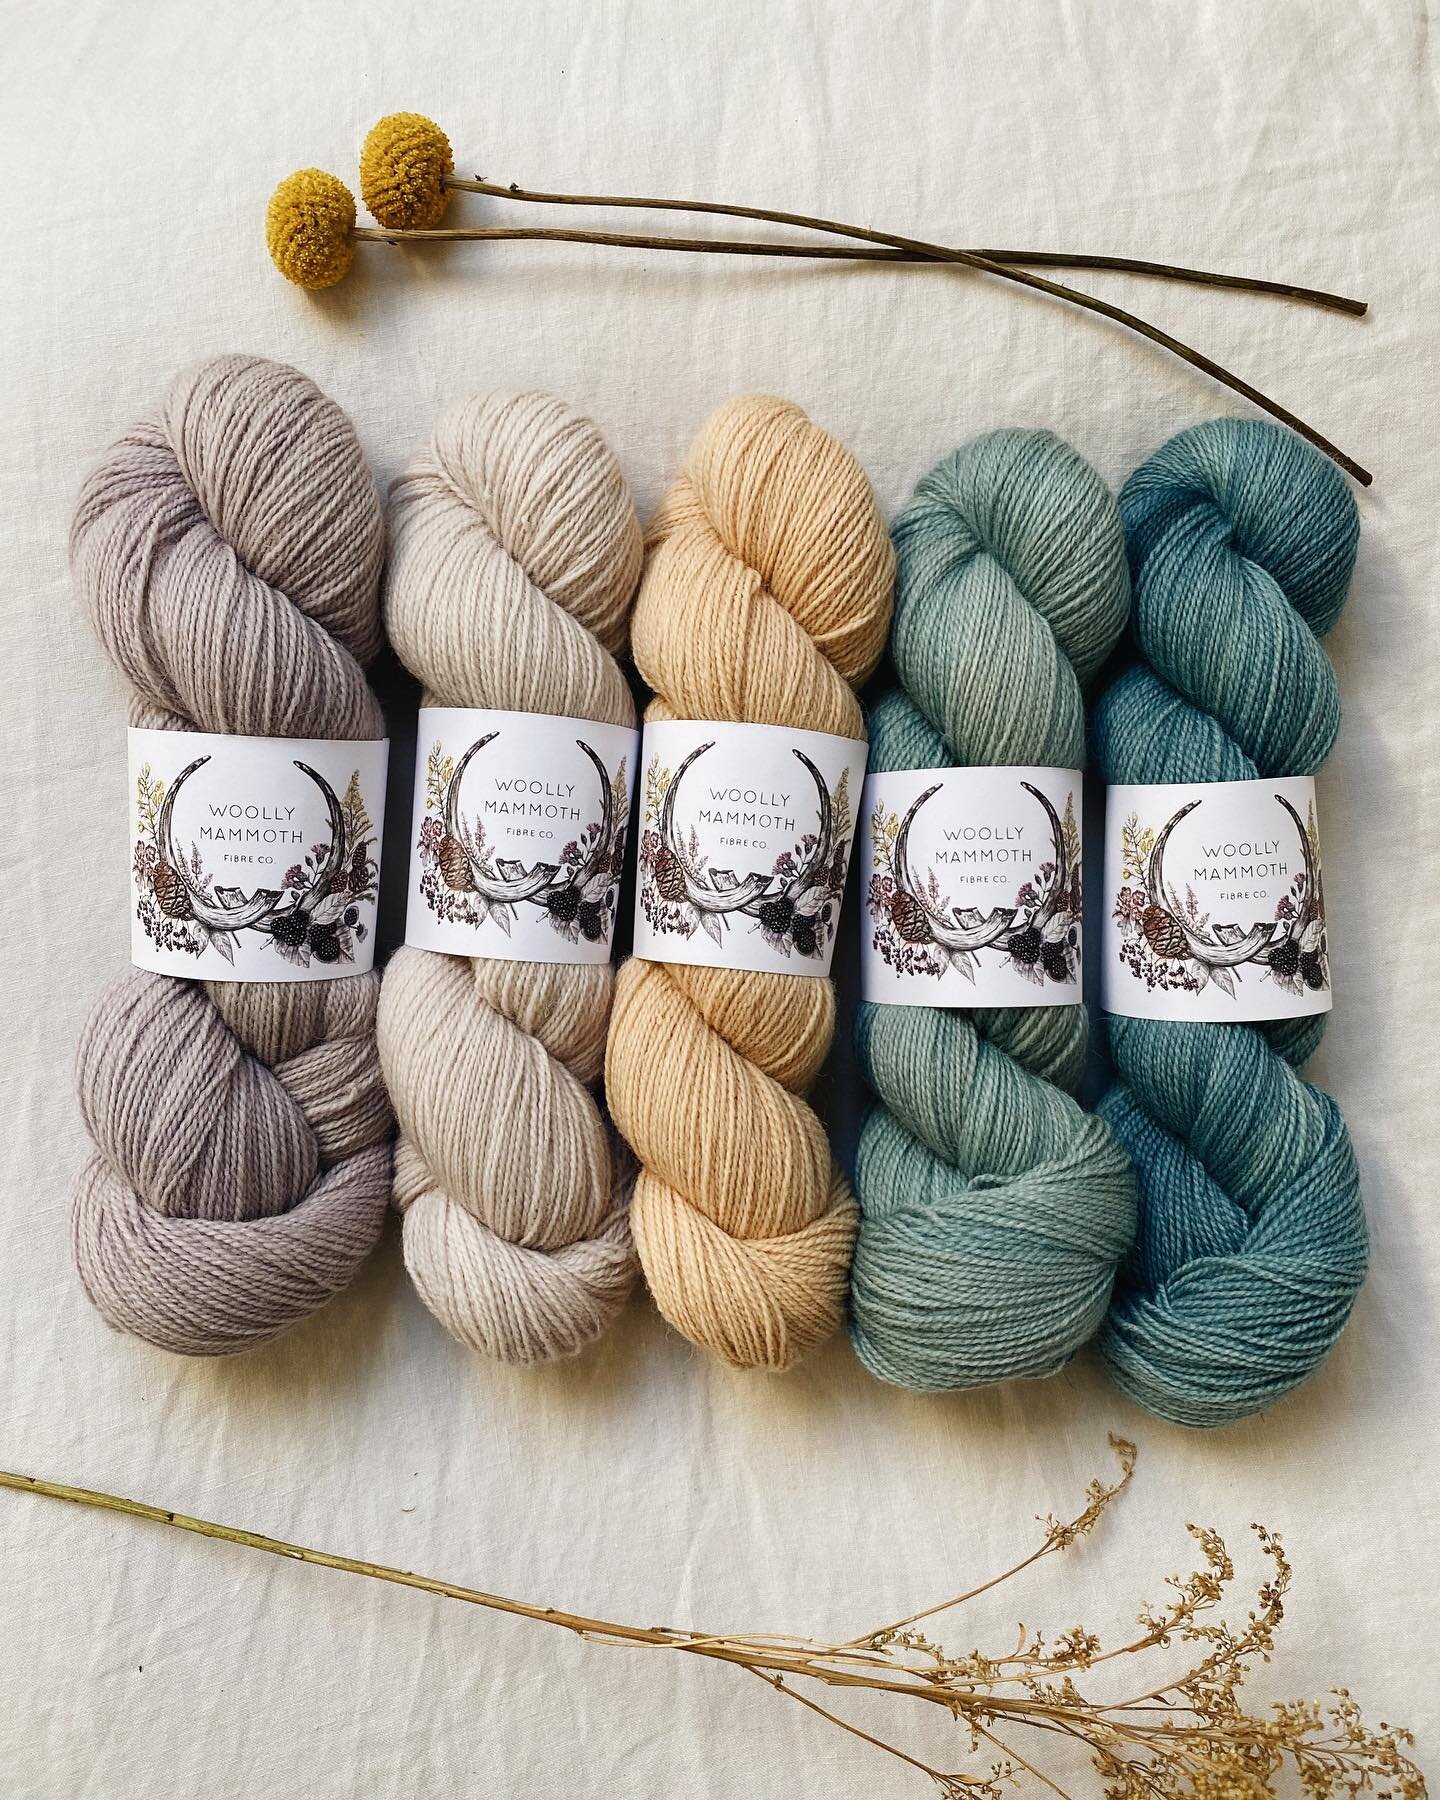 Another wee gradient. L-R: Oyster 1, Jasmine, Coast OOAK 1, Oceanic Light and Oceanic Dark all coming tonight in the shop update 🥰 (24th Feb, 8:00pm GMT!). You can check out the preview in my journal on my website &hearts;️✨
.
.
.
.
.
#woollymammoth